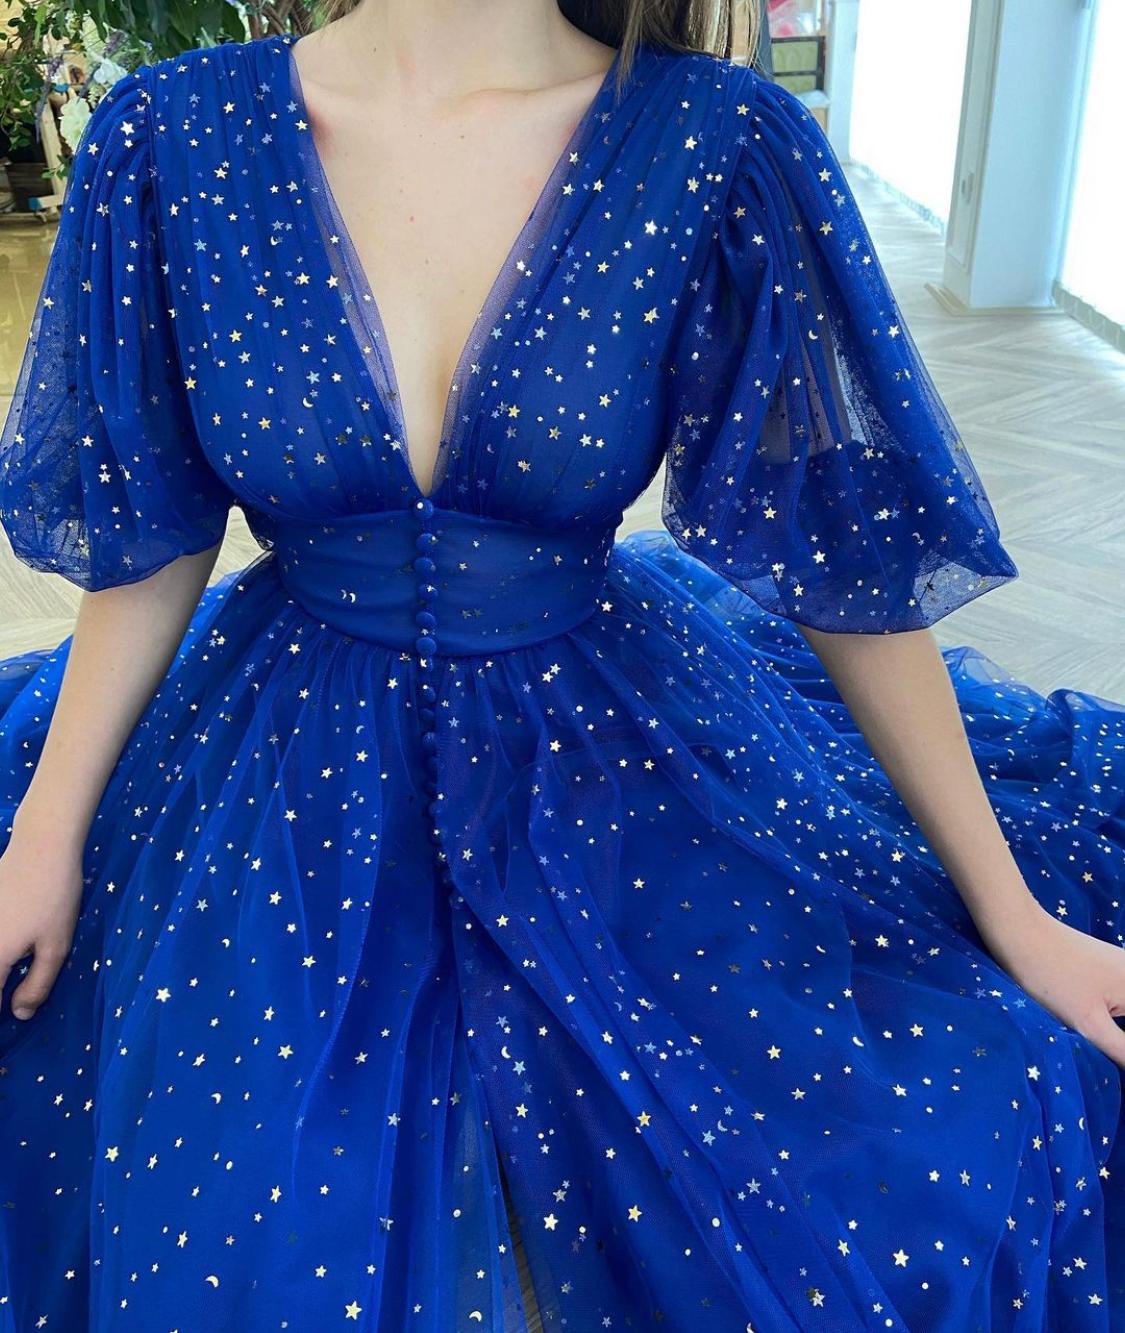 Blue midi dress with v-neck, short sleeves and starry fabric